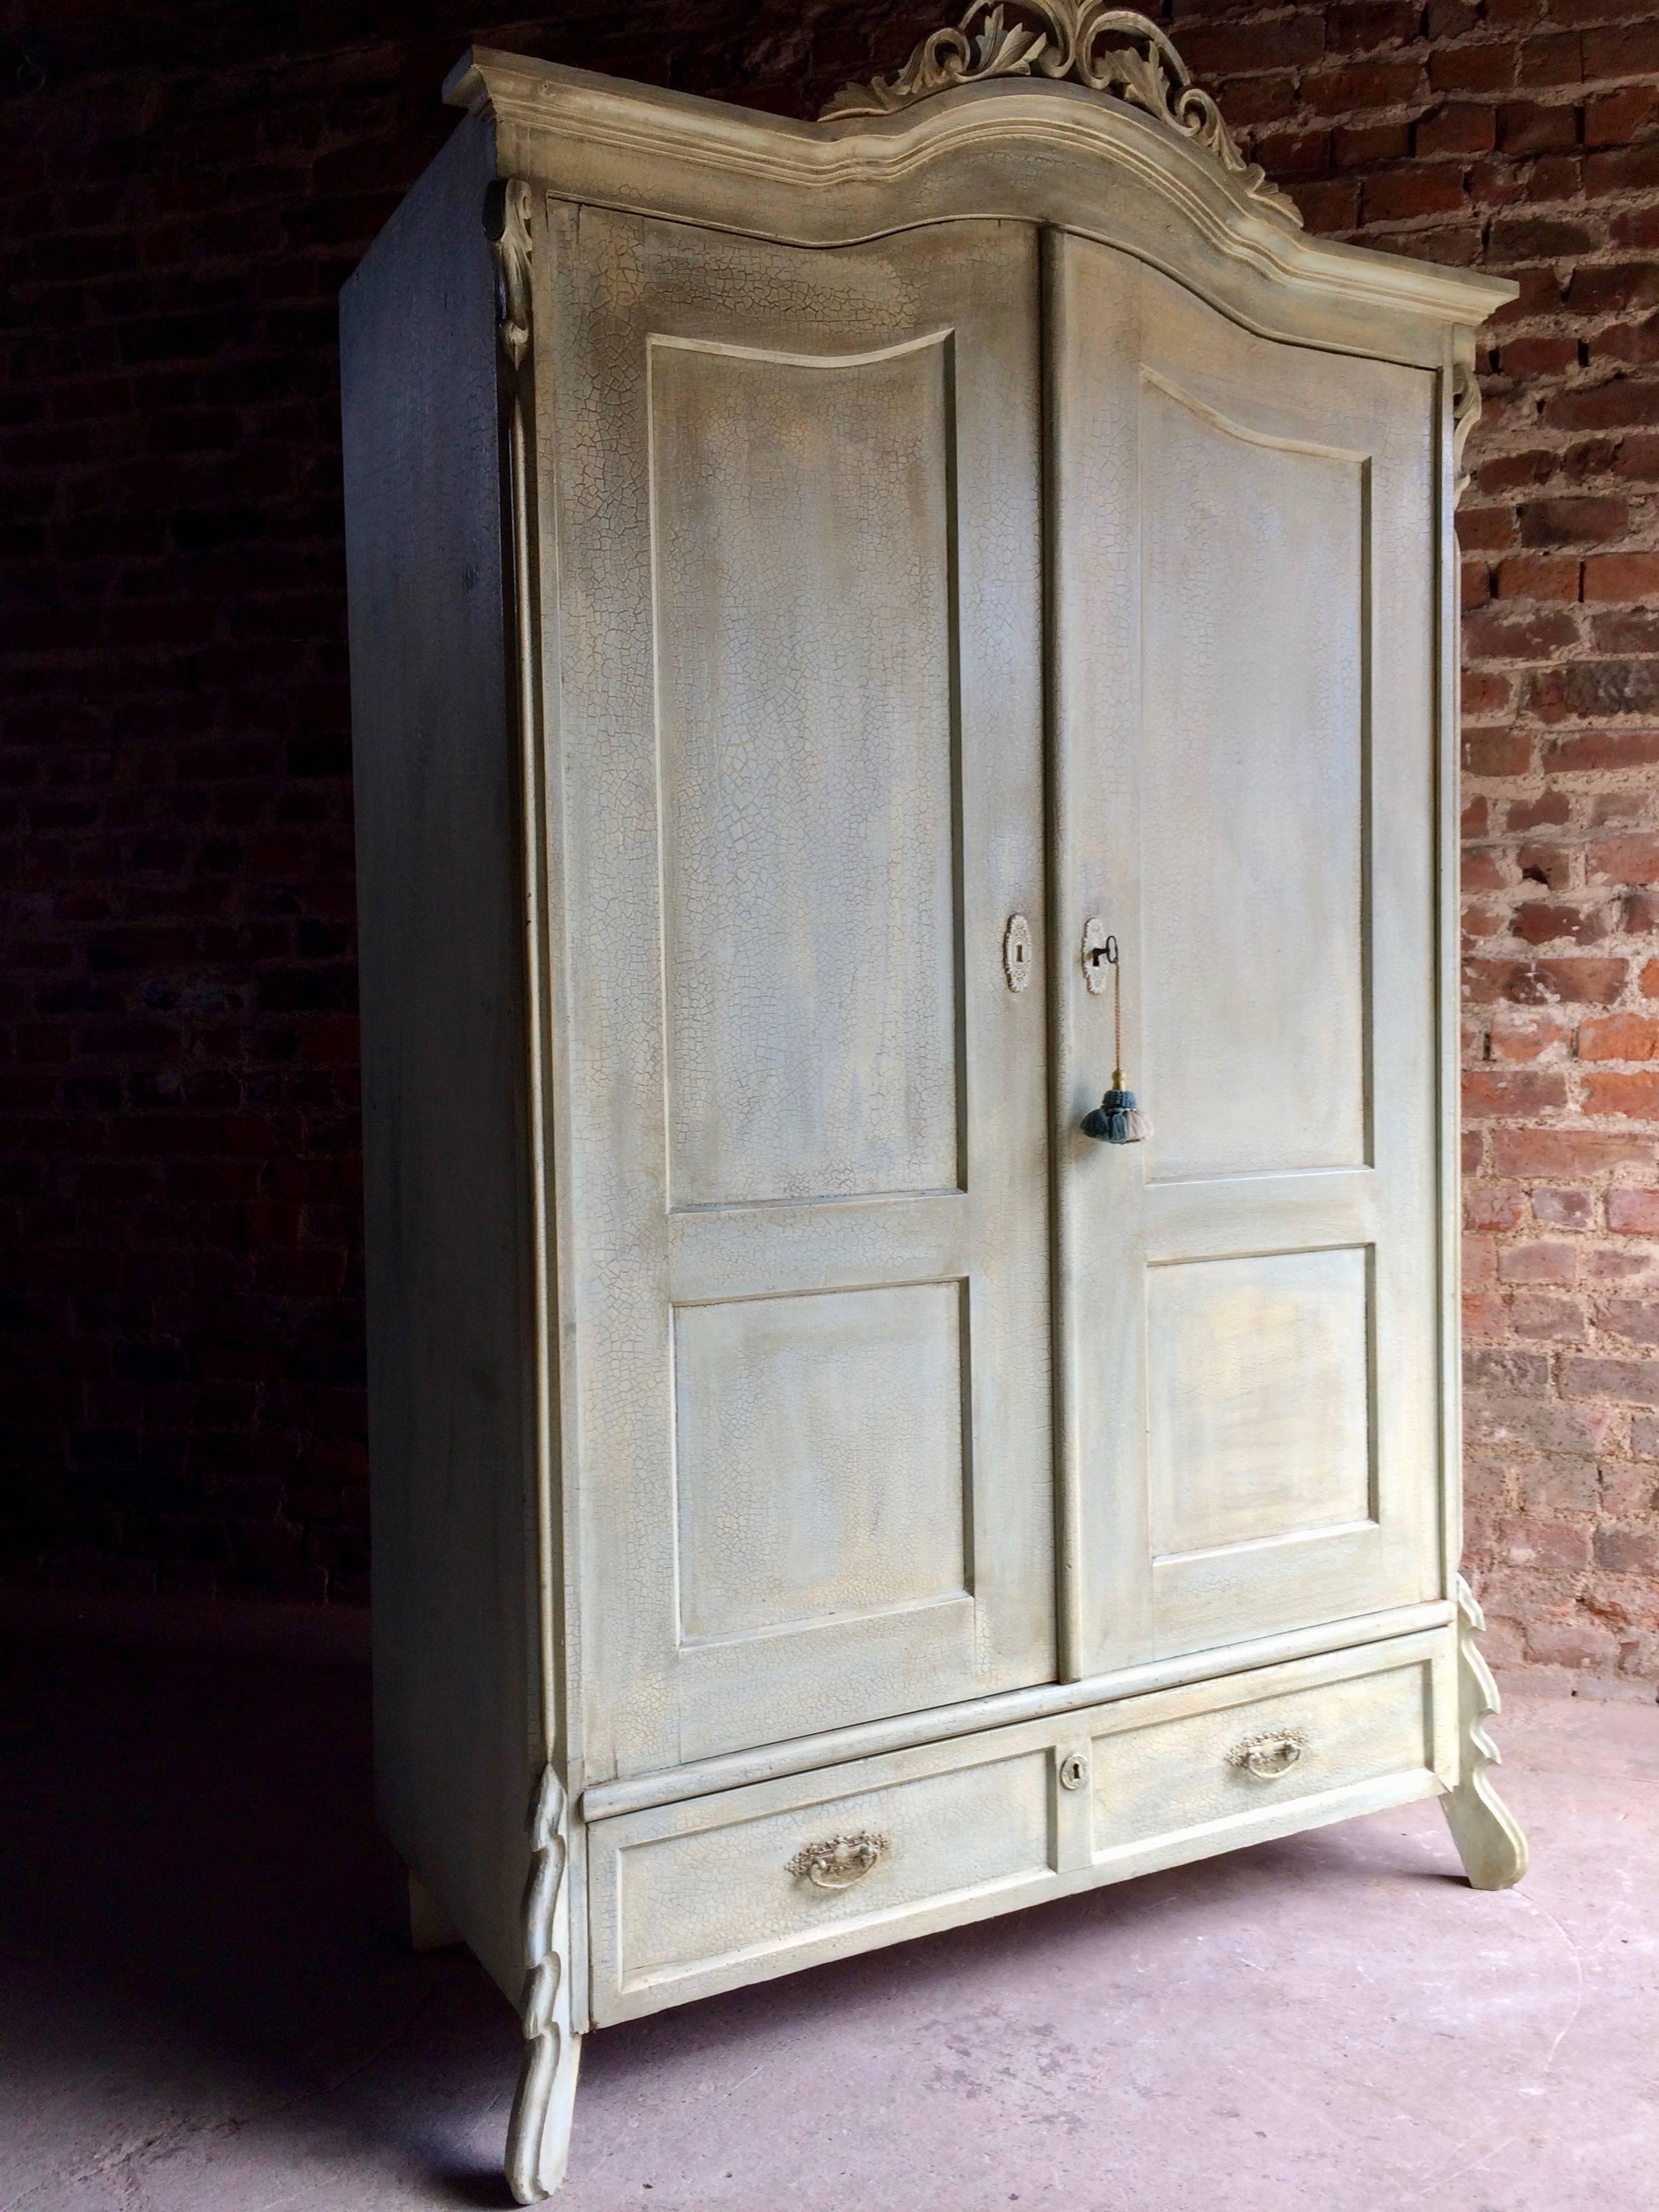 Antique French Painted Armoire Wardrobe Solid Pine Painted Distressed 1